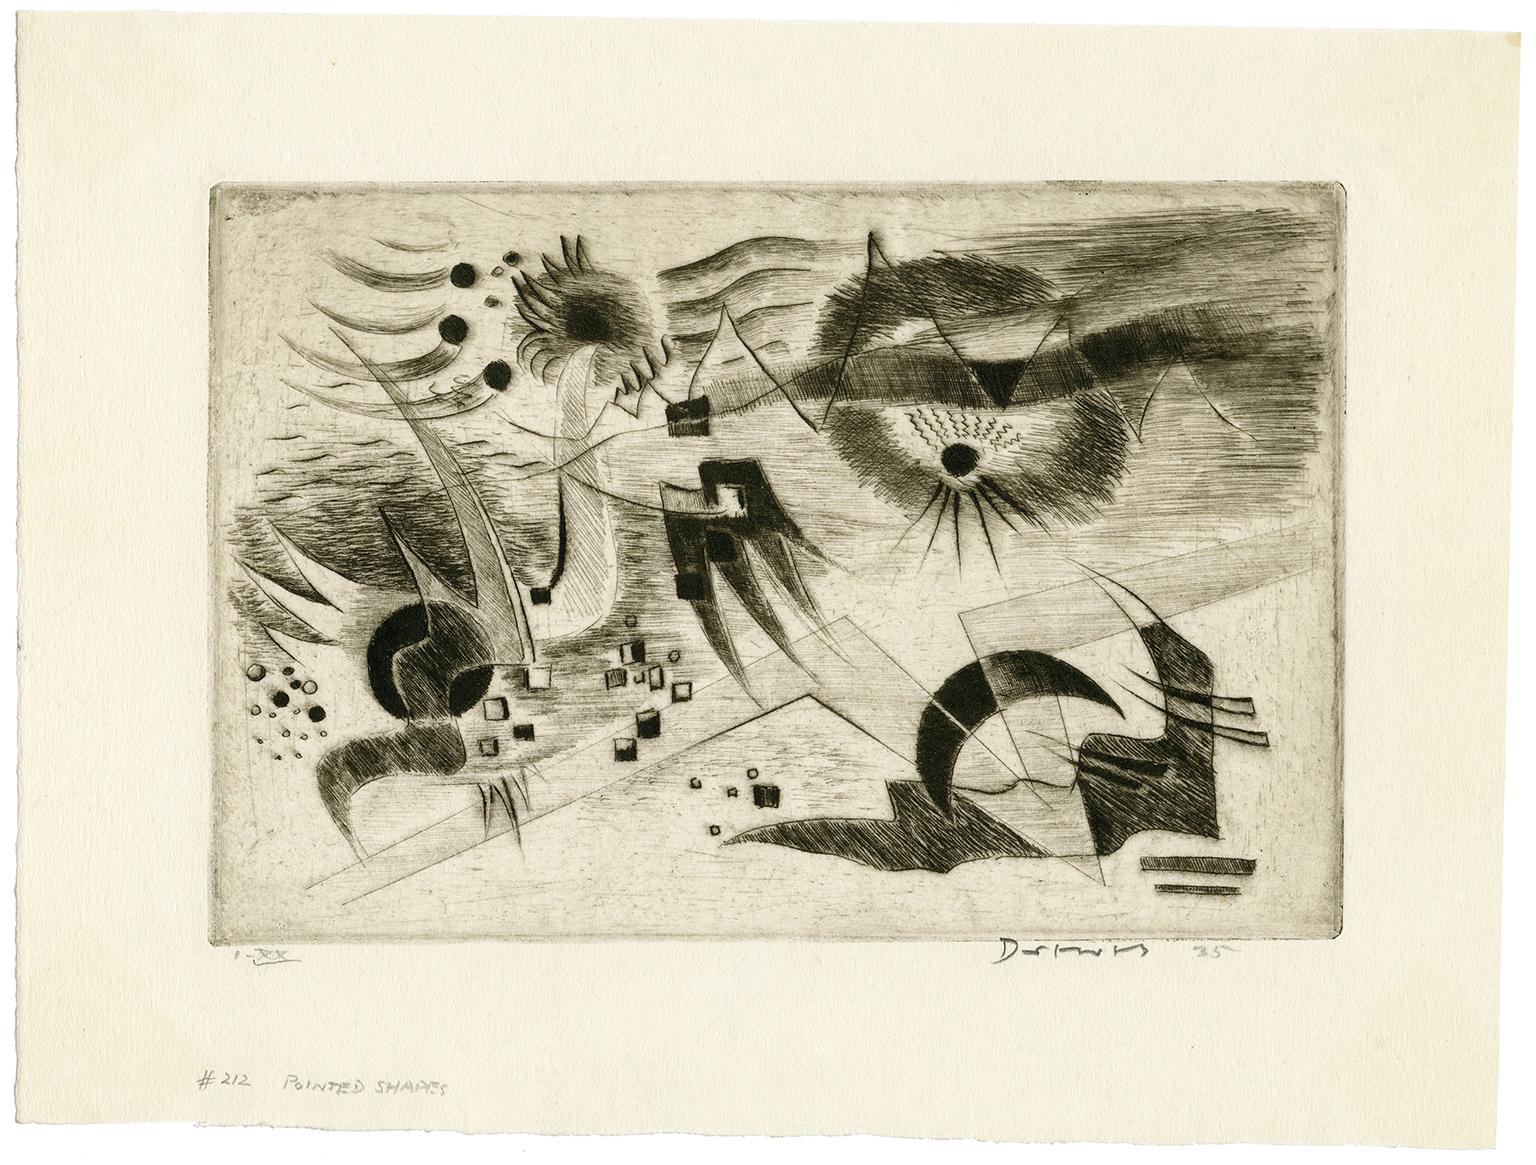 Pointed Shapes and Black Half Moon - Print by Werner Drewes